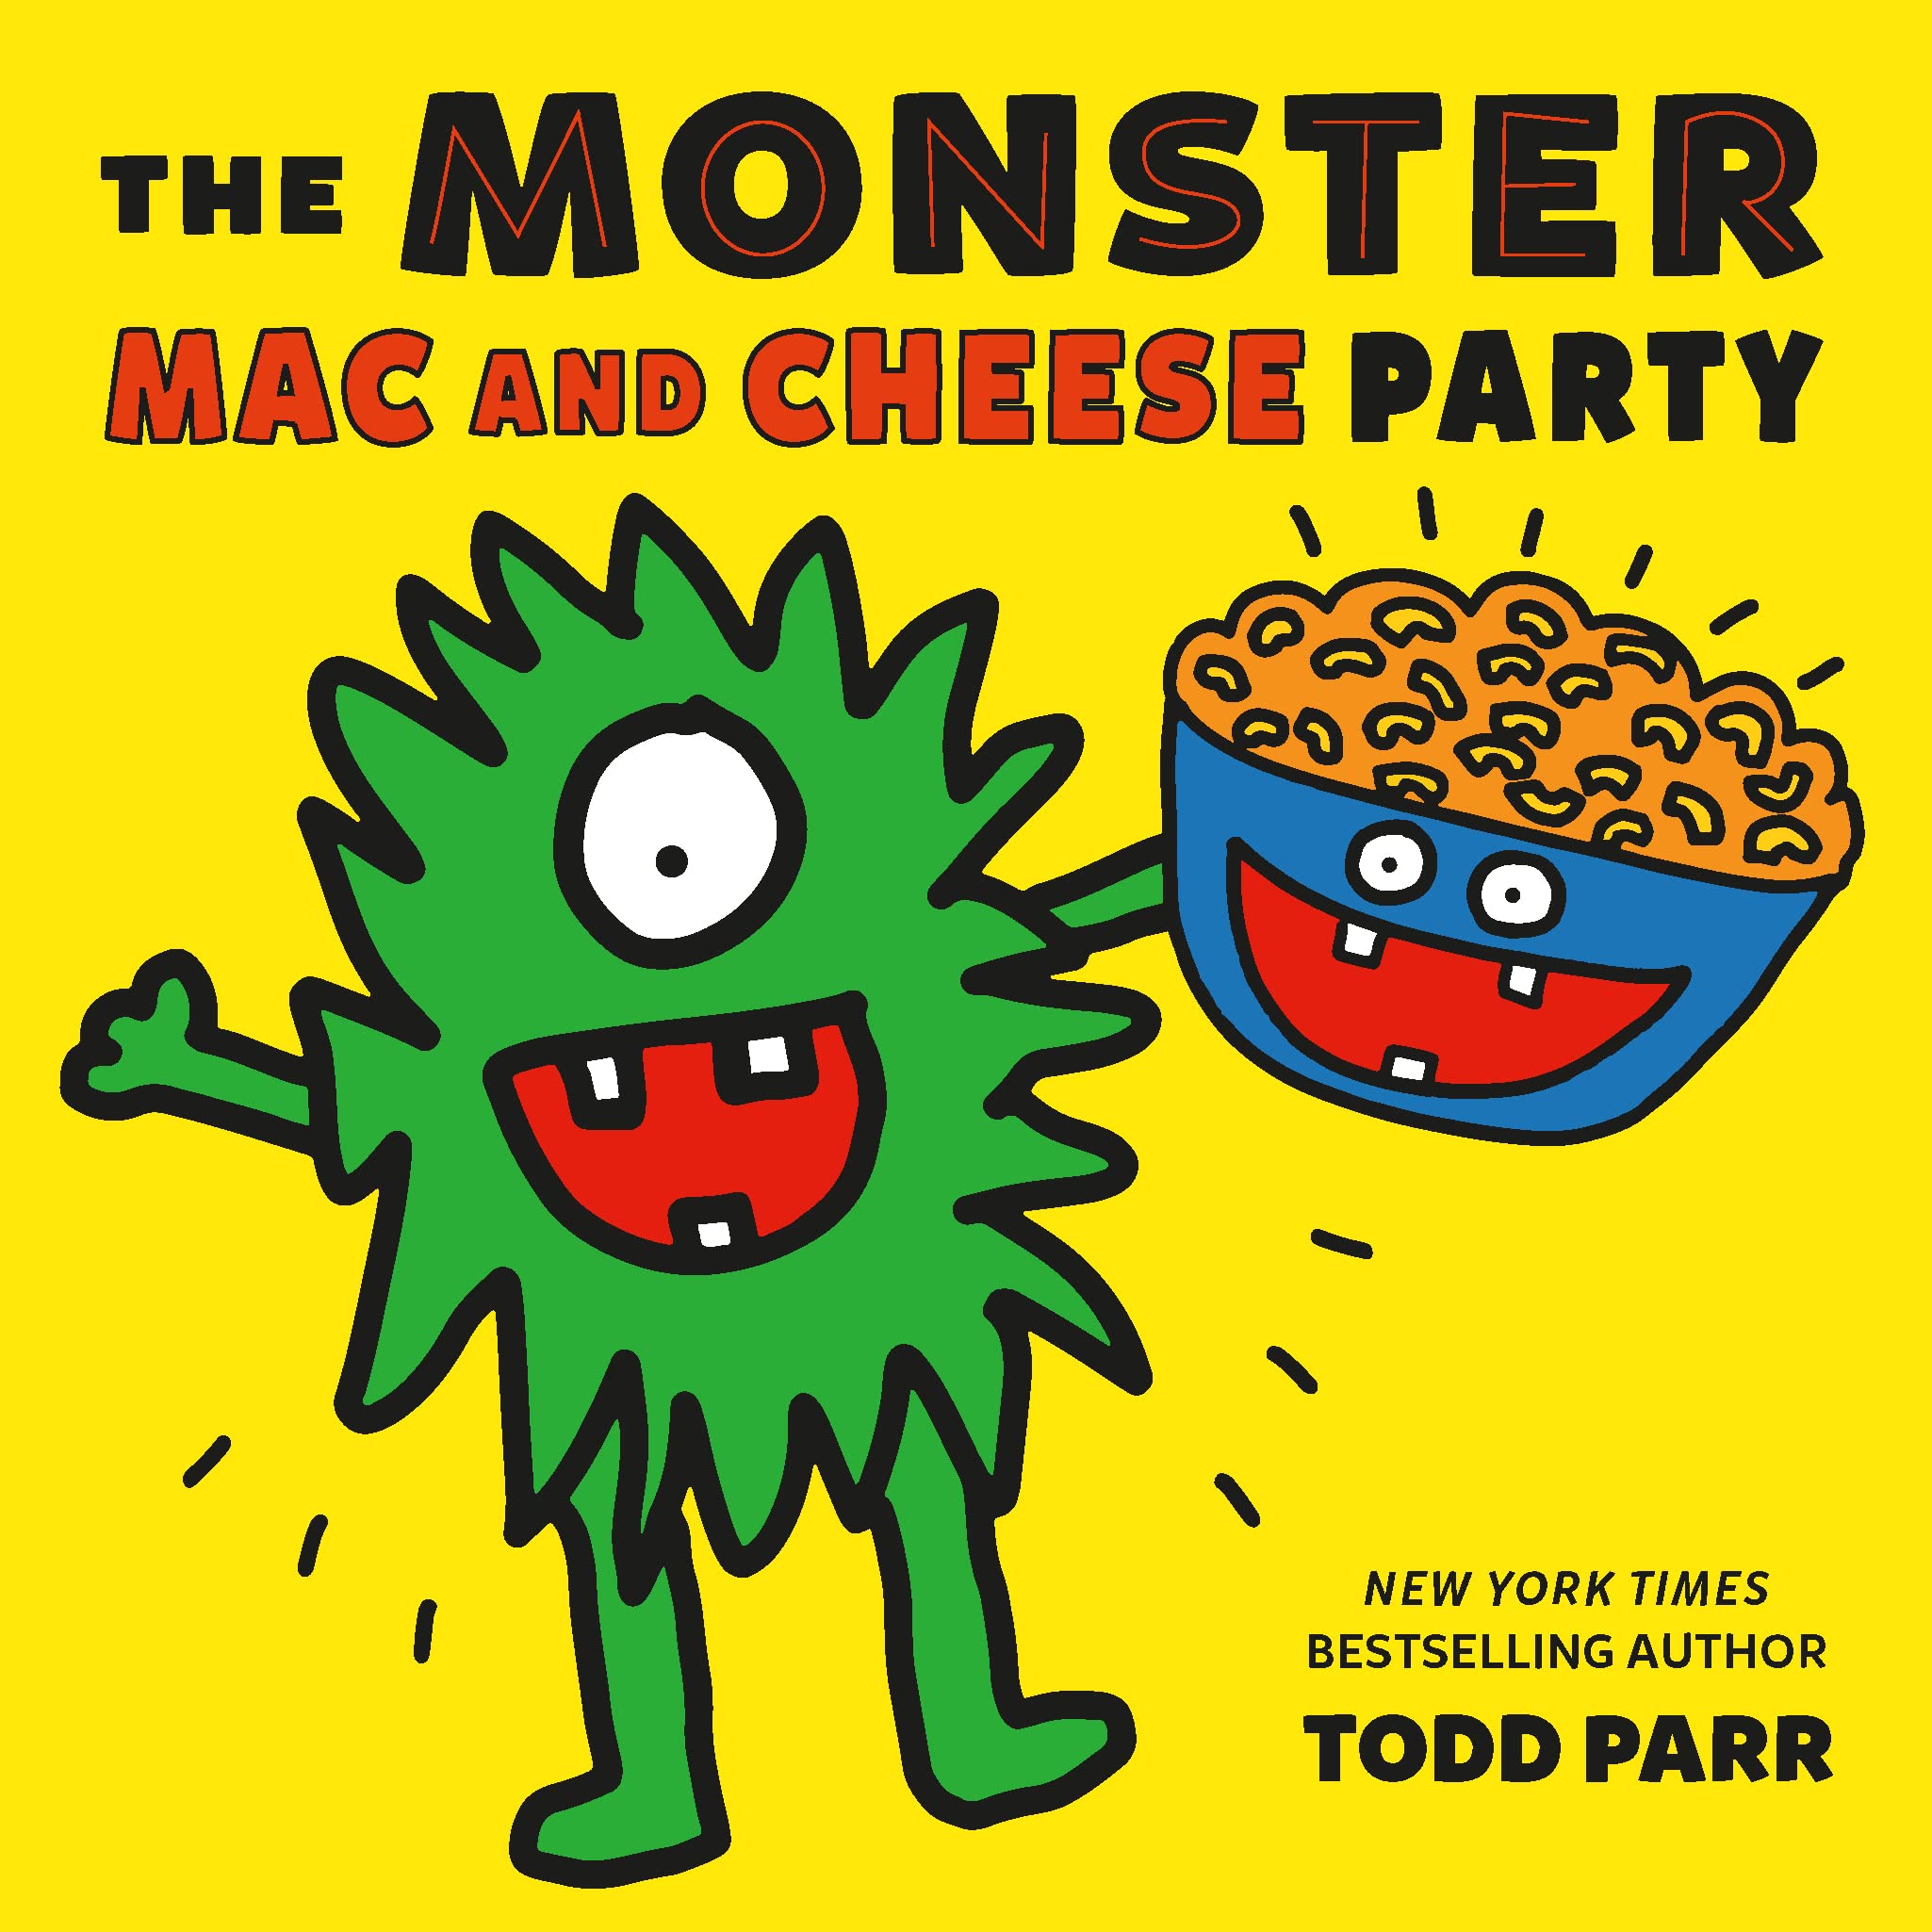 Title and illustrated monster holding a bowl of mac and cheese